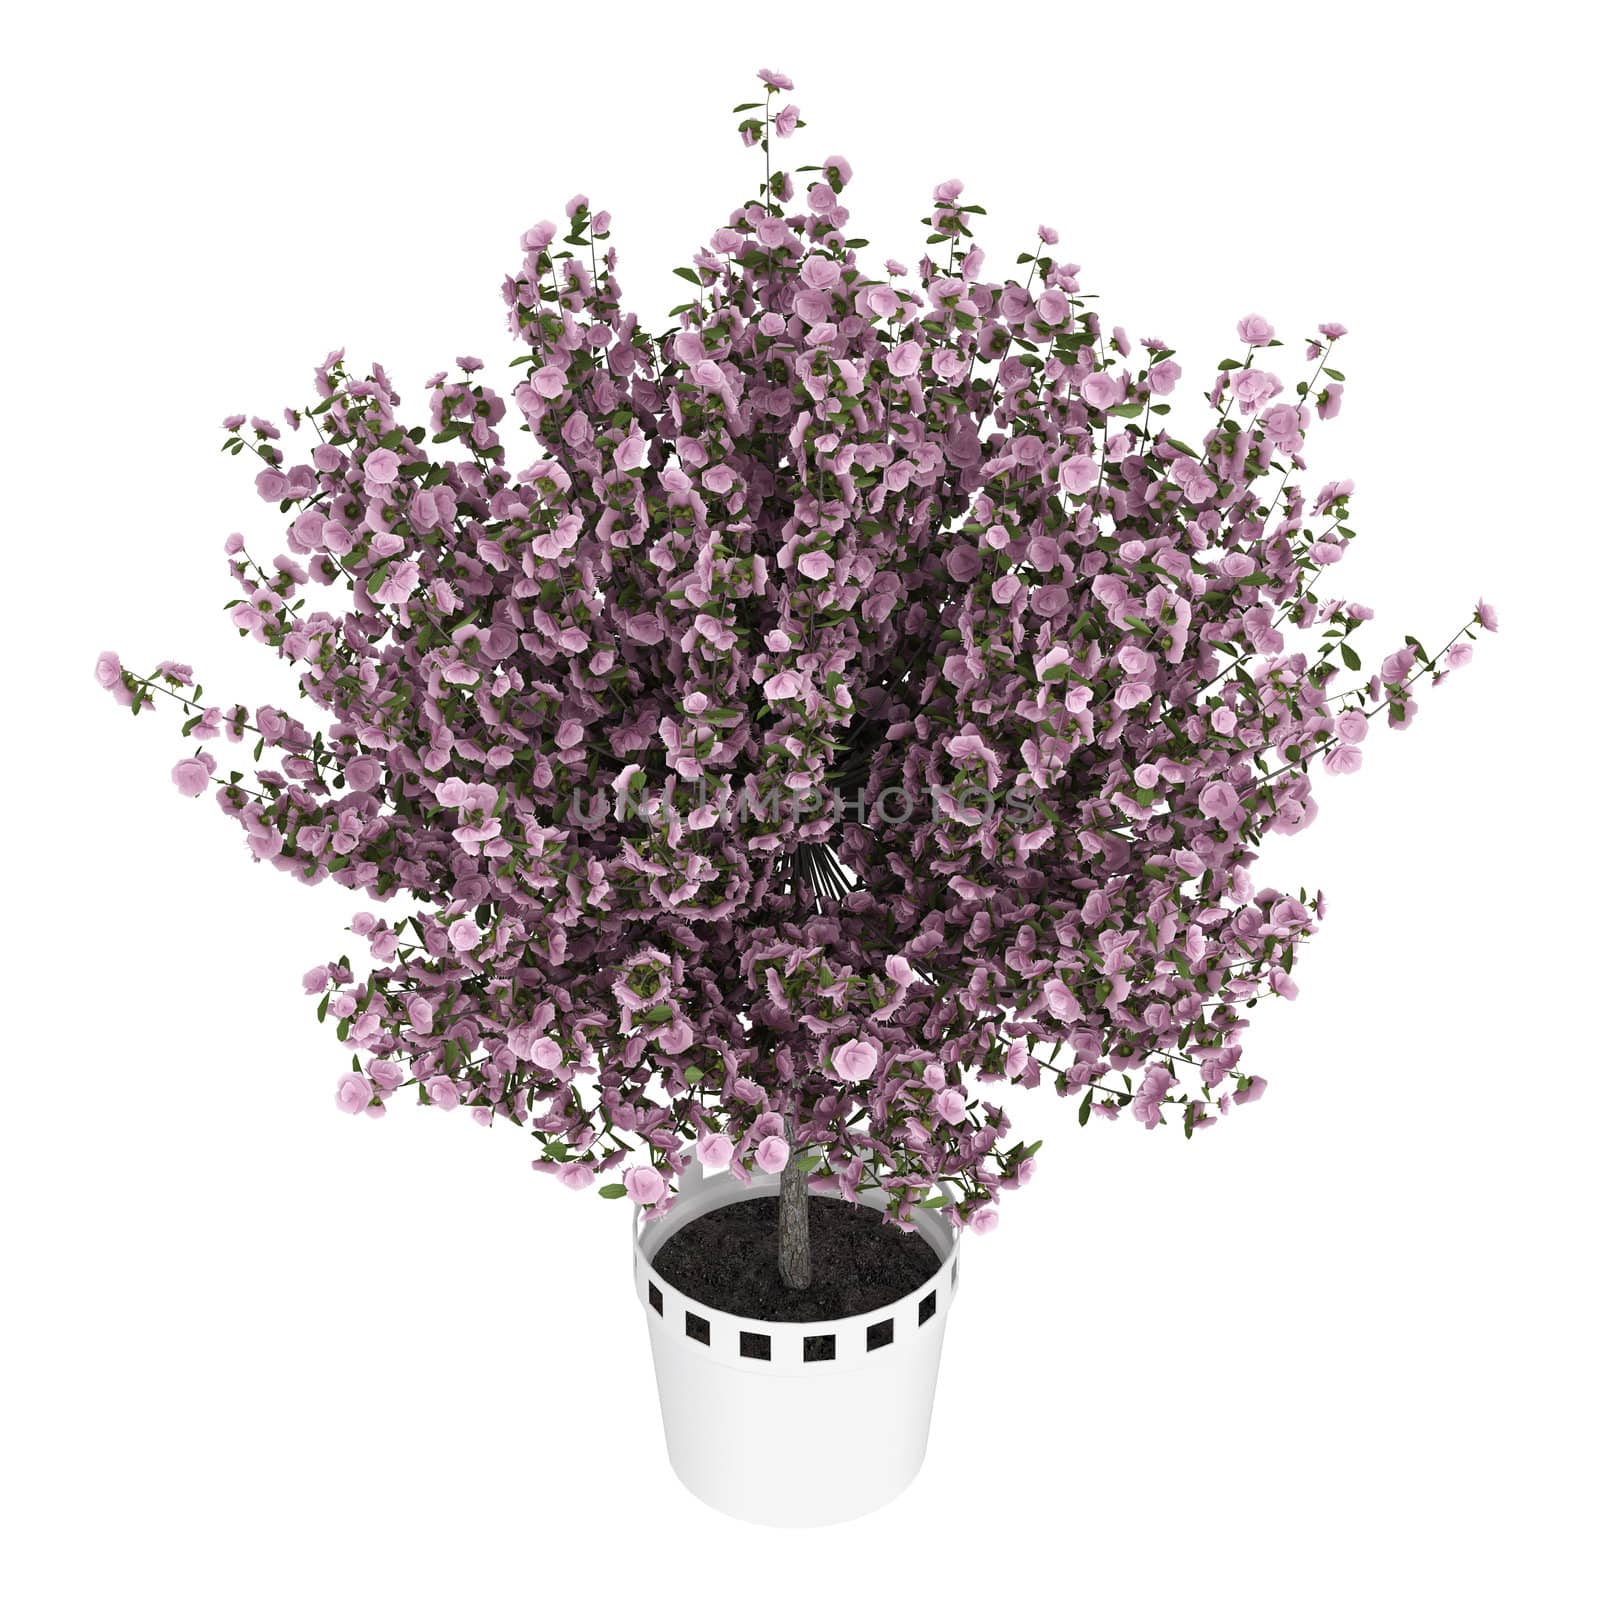 Studio shot of beautiful purple home plant isolated on white background